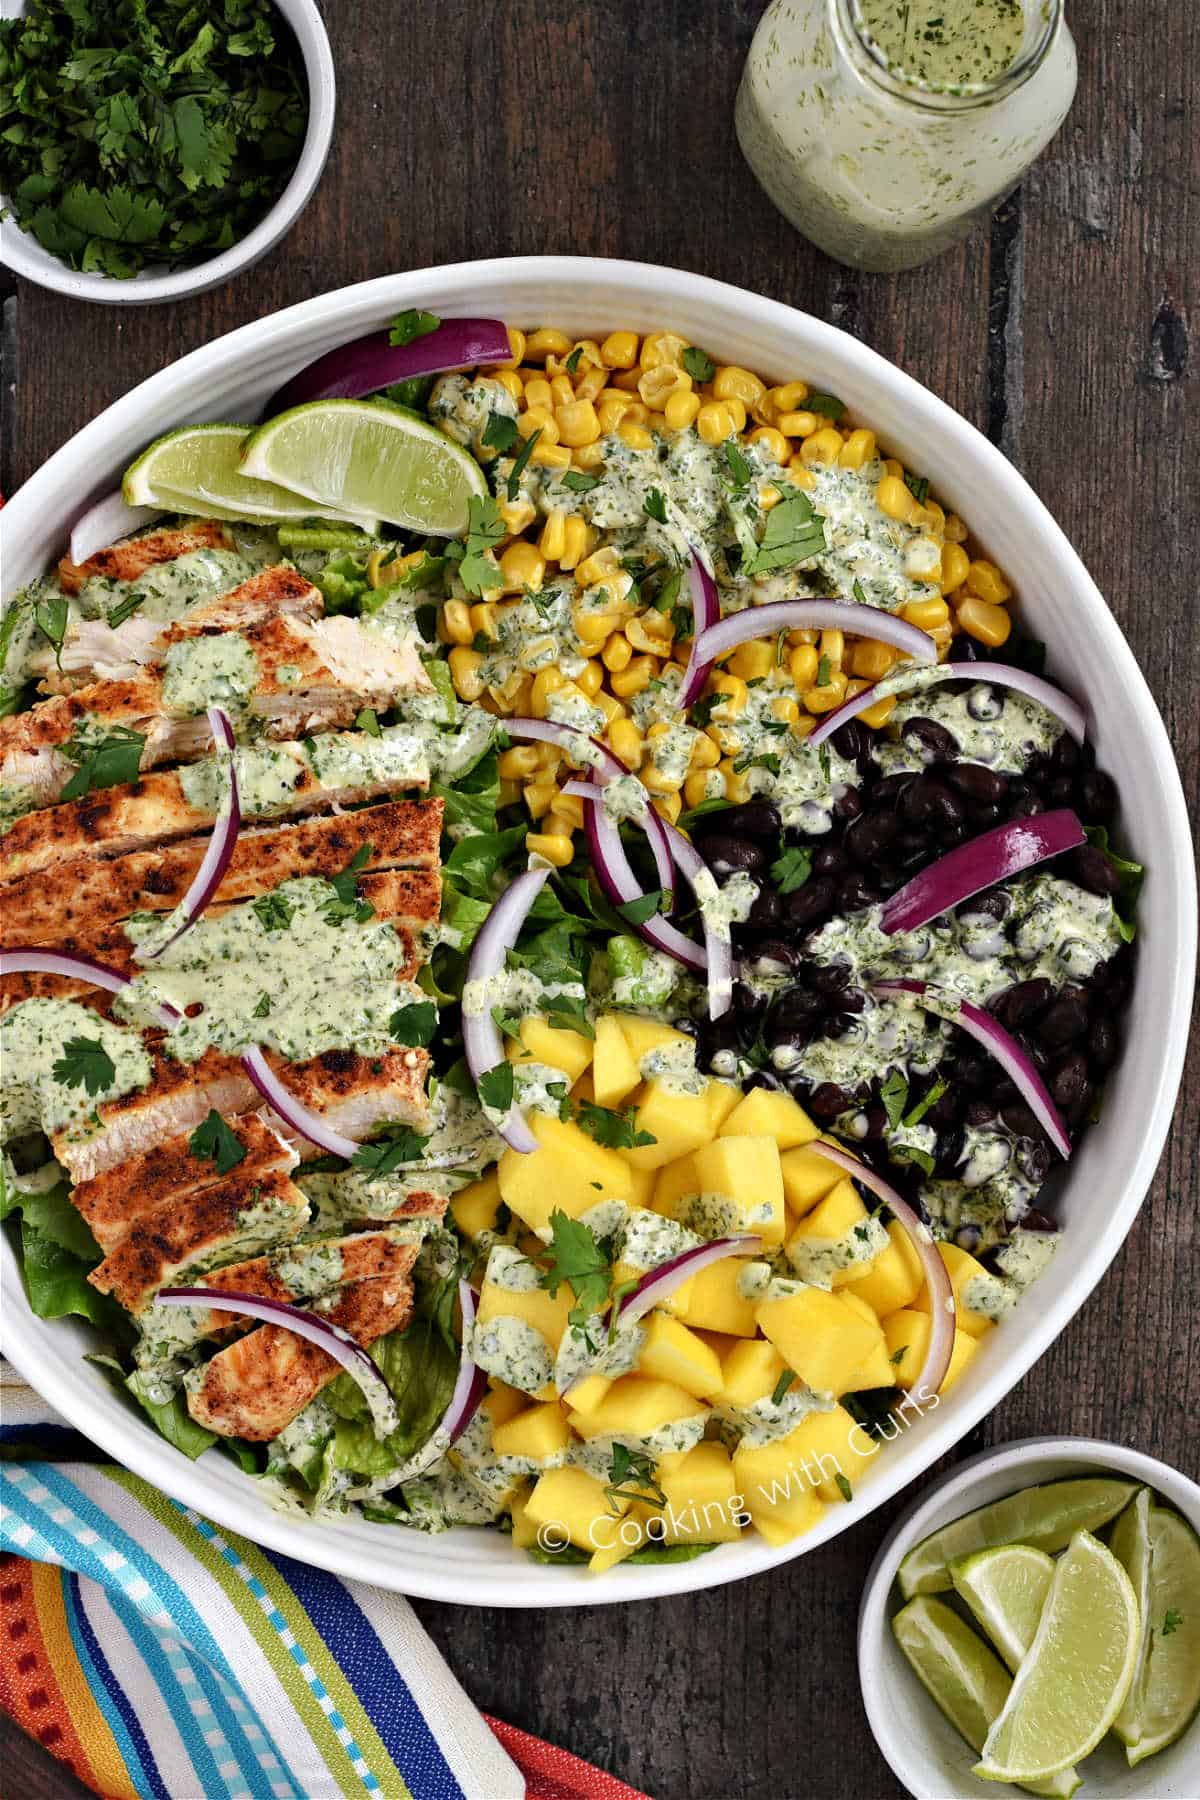 Southwest Chicken Salad with corn, black beans, mango chunks, and red onion slices topped with creamy cilantro lime dressing.